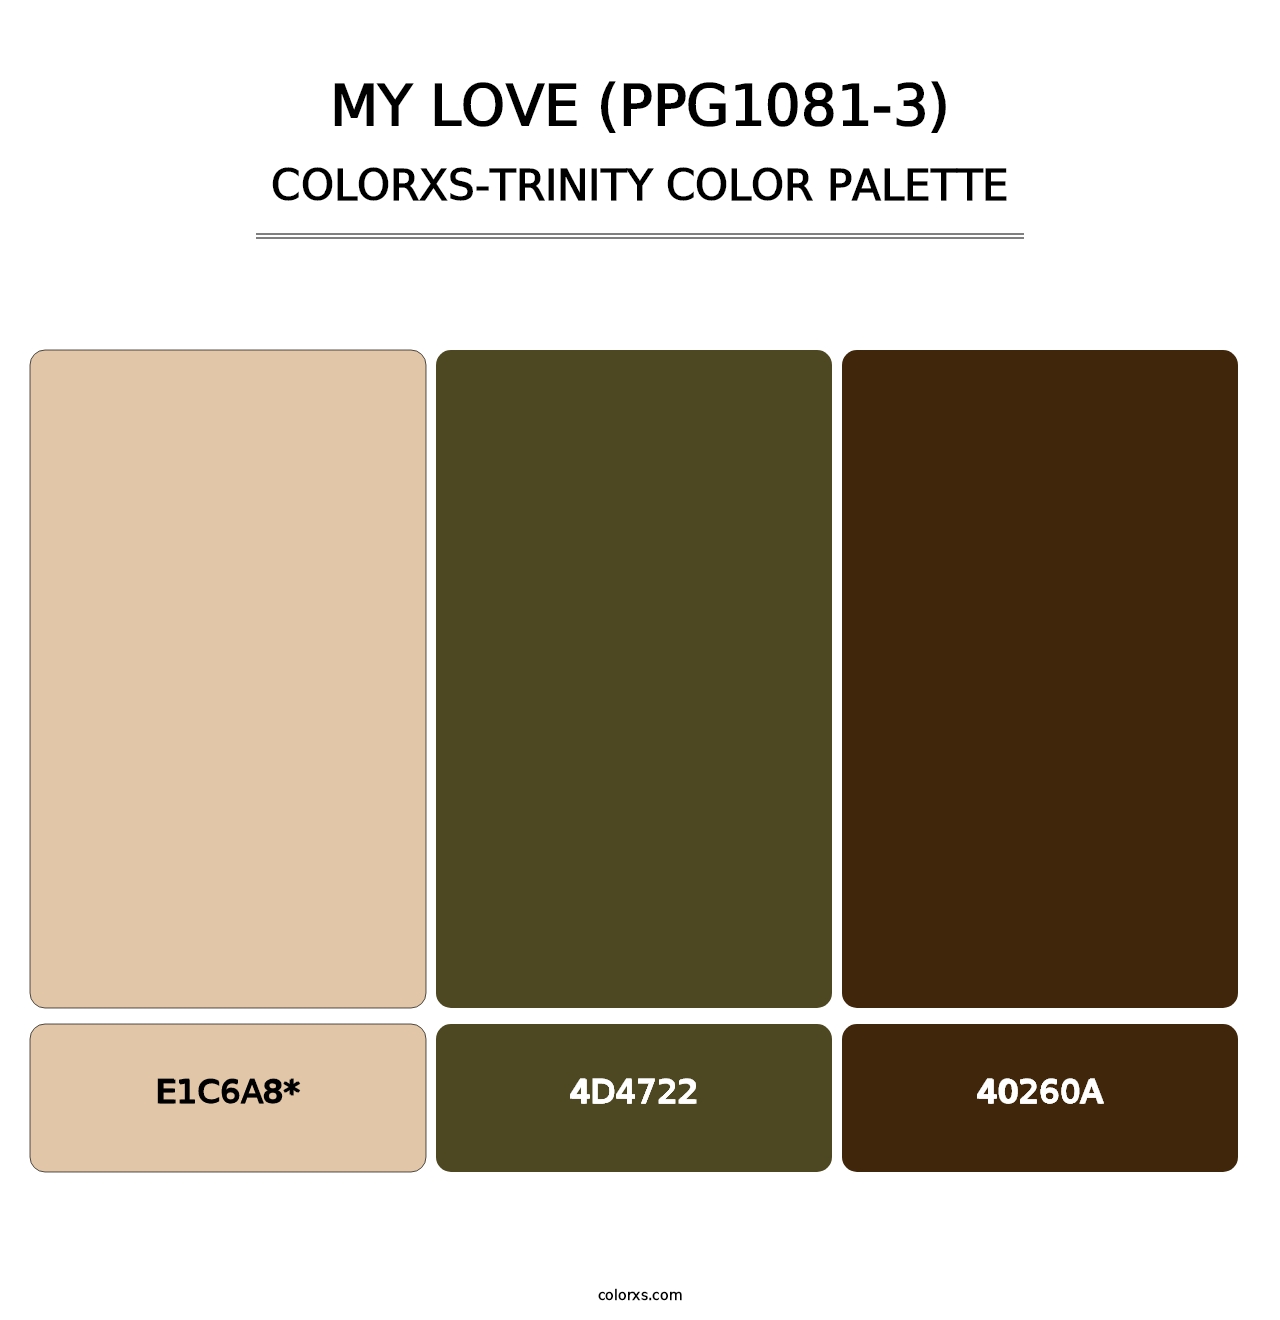 My Love (PPG1081-3) - Colorxs Trinity Palette